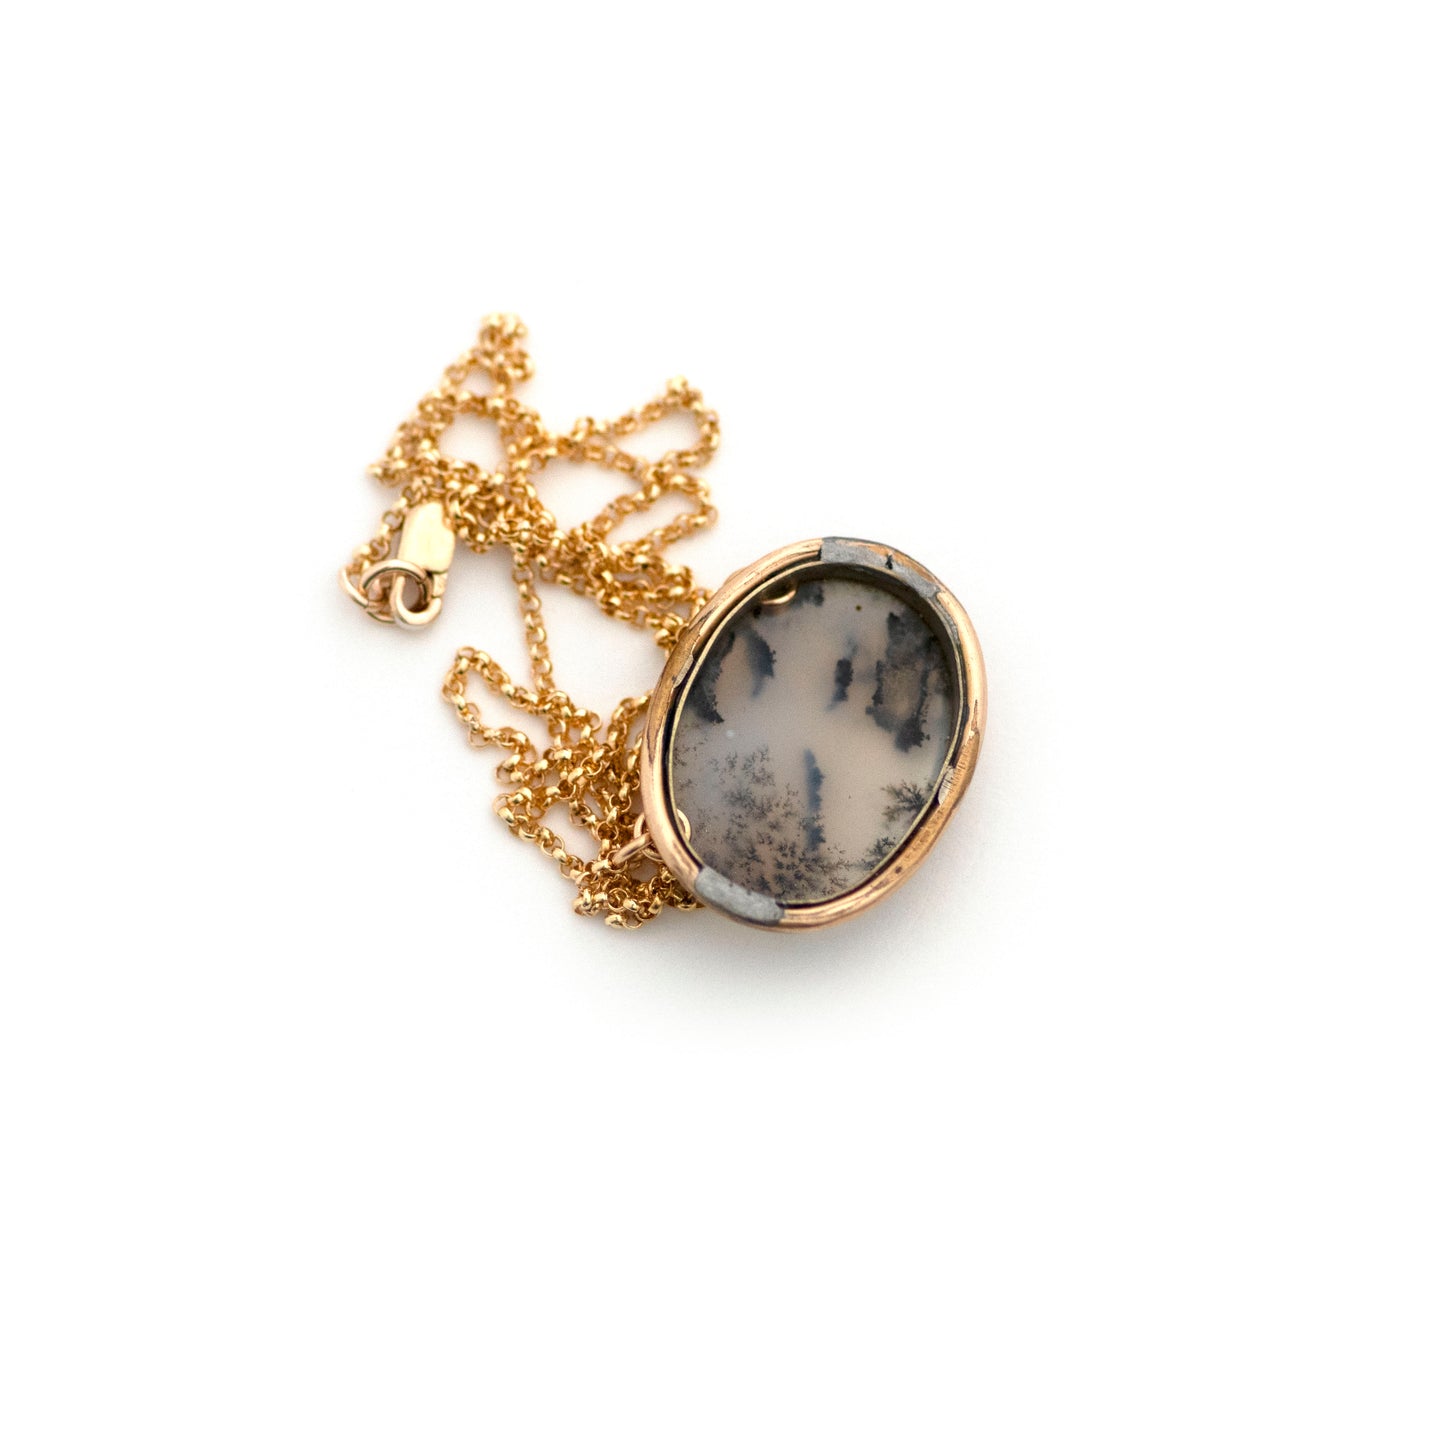 The back of a one-of-a-kind conversion necklace is made up of:  Gold filled Victorian brooch pendant from the late 1800s with dendritic moss agate. 